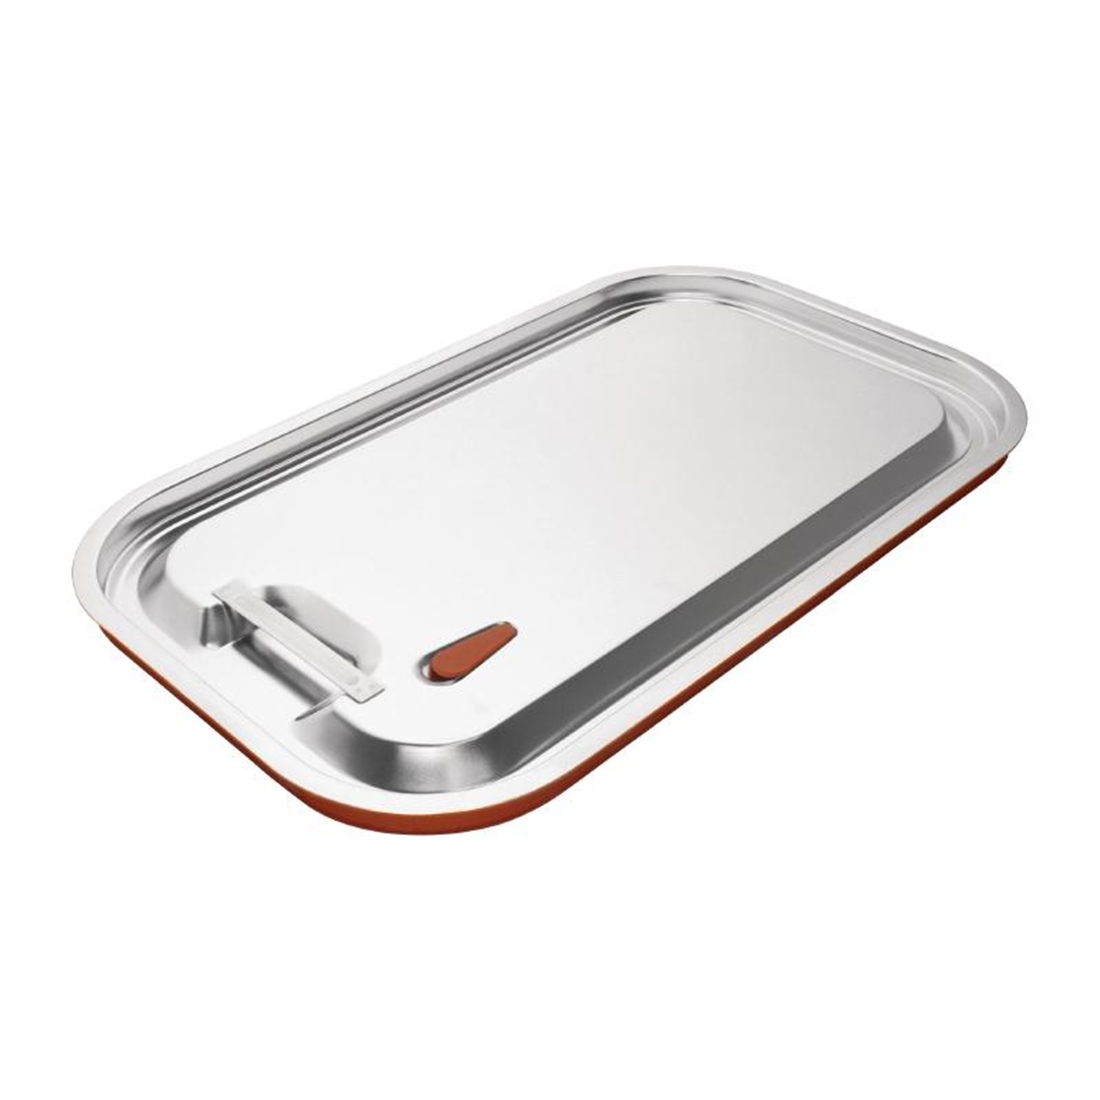 Vogue Stainless Steel and Silicone Sealable Gastronorm Lid 1/1